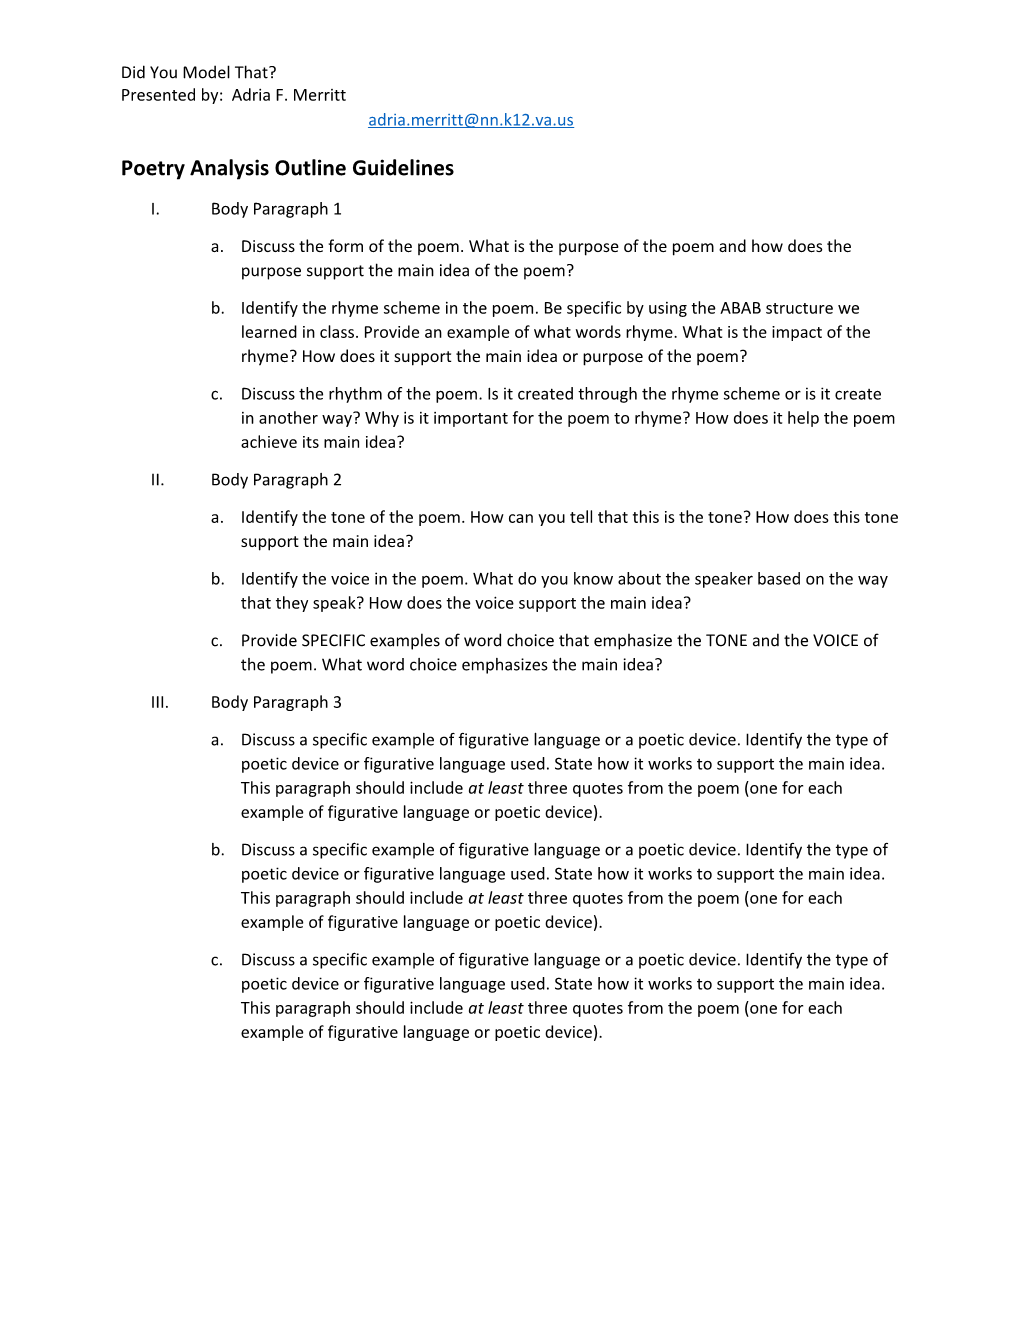 Poetry Analysis Outline Guidelines